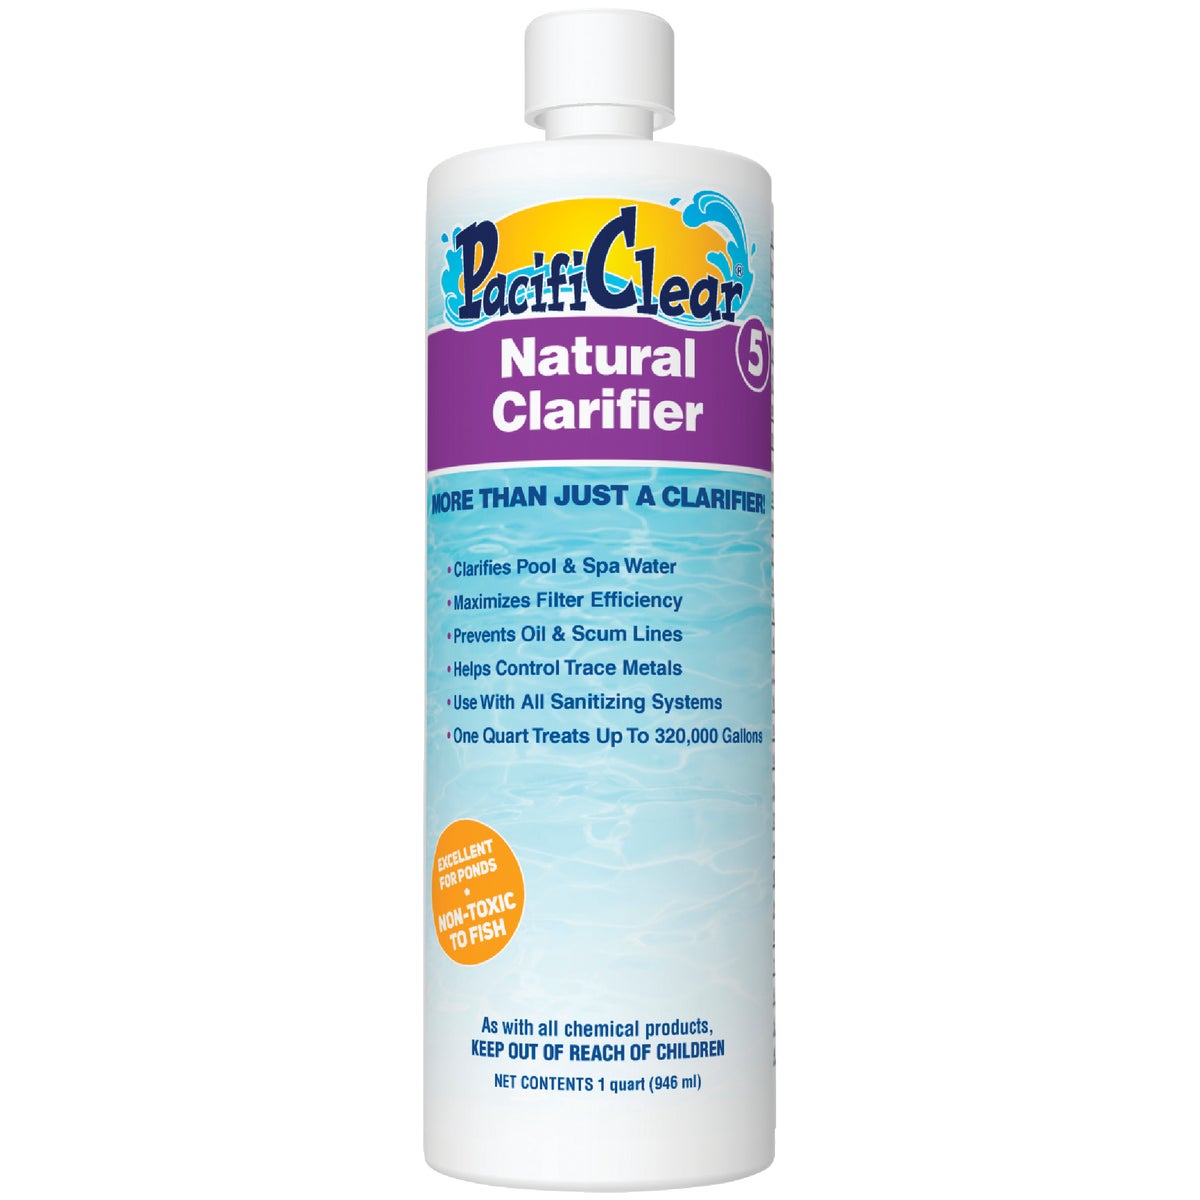 Item 800587, Clarifier with natural properties clarifies pool and spa water.